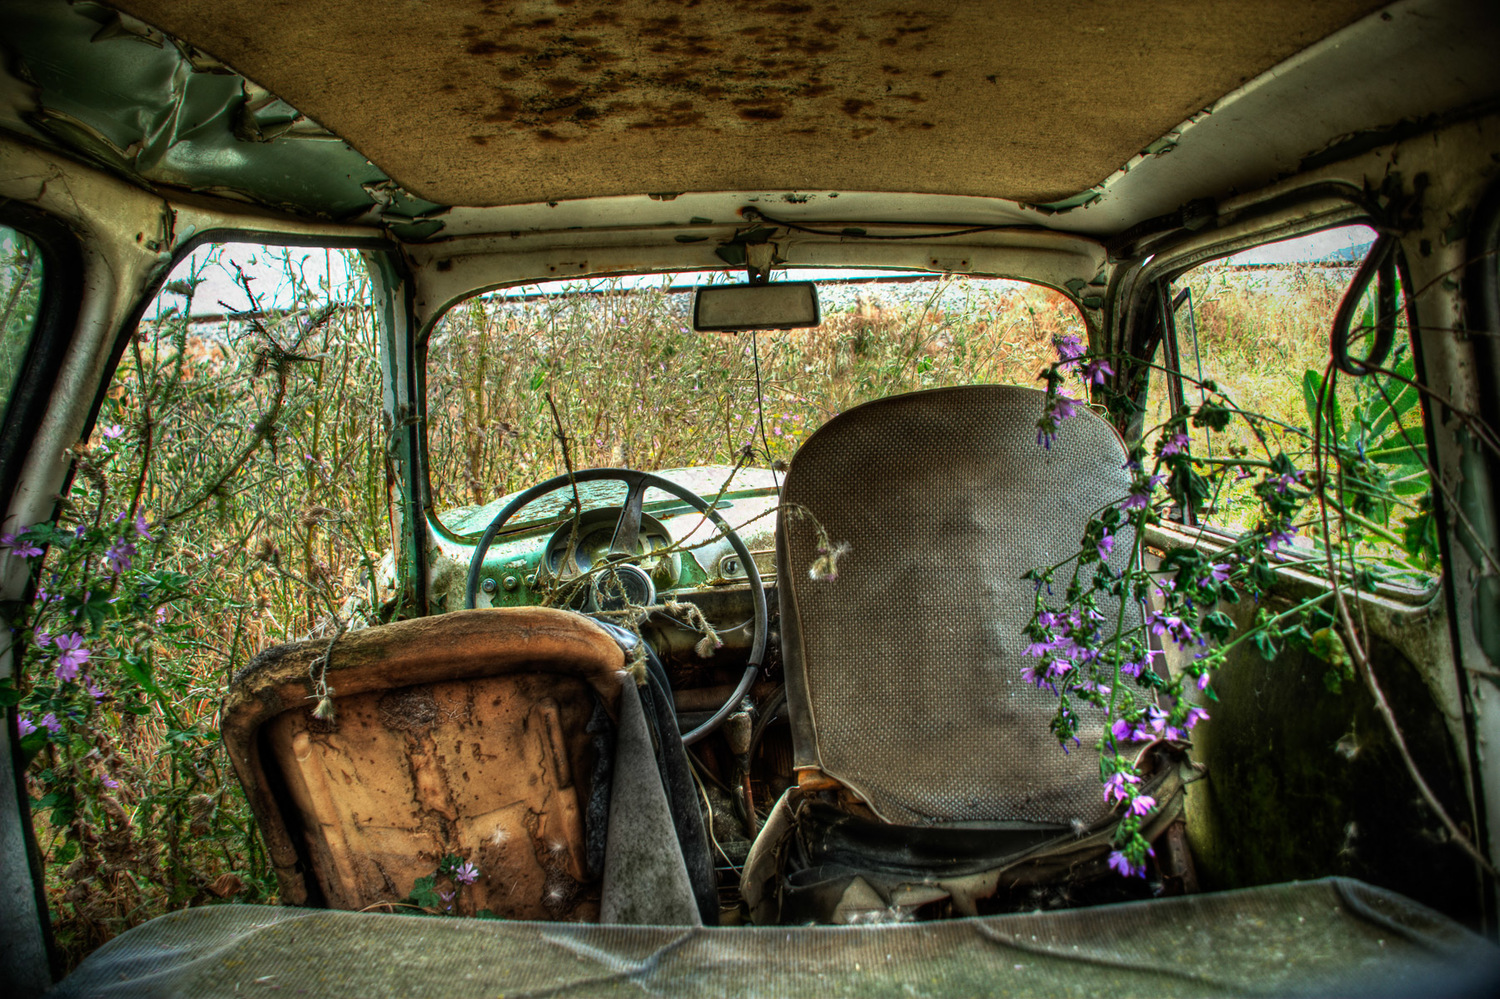 TODO-- | Photo Title: Abandoned Car In Field | 
        Photo by Alicia Rius ©2023